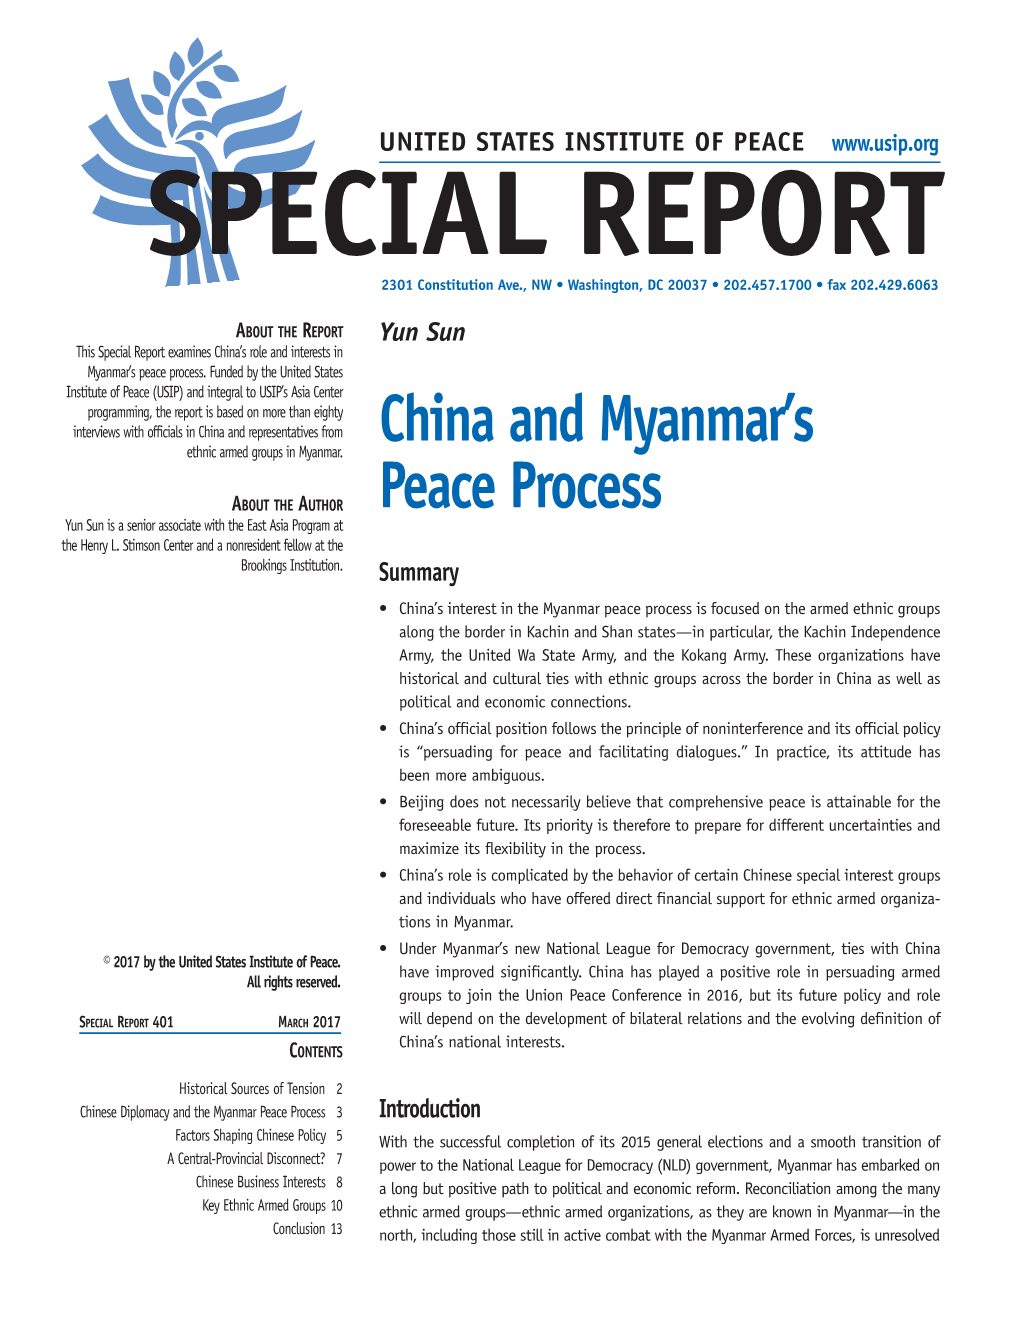 China and Myanmar's Peace Process